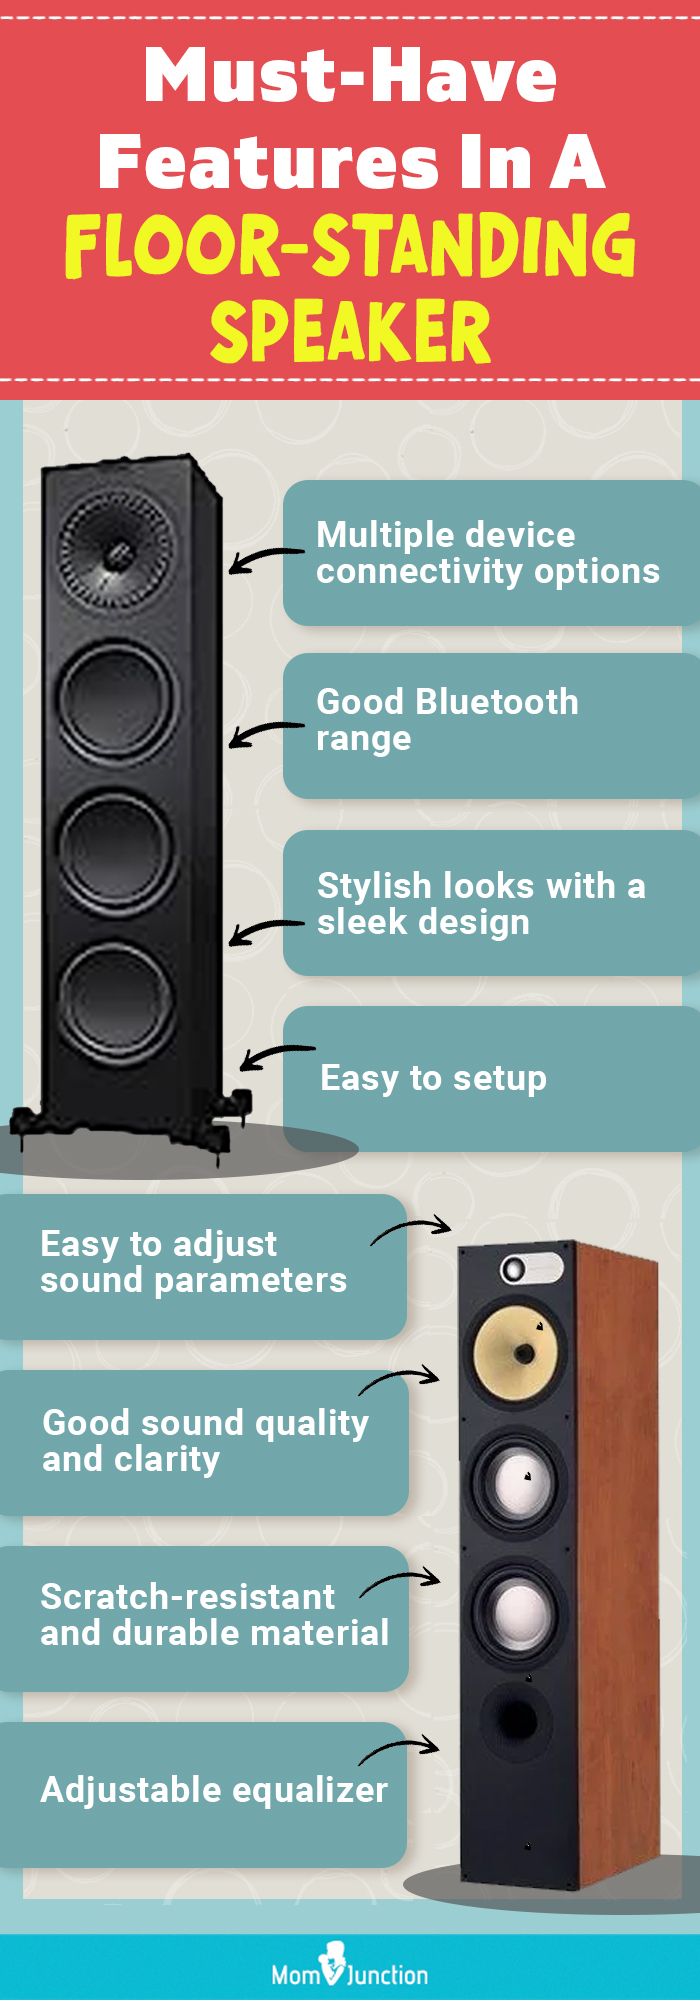 Must Have Features In A Floor standing Speaker (infographic)